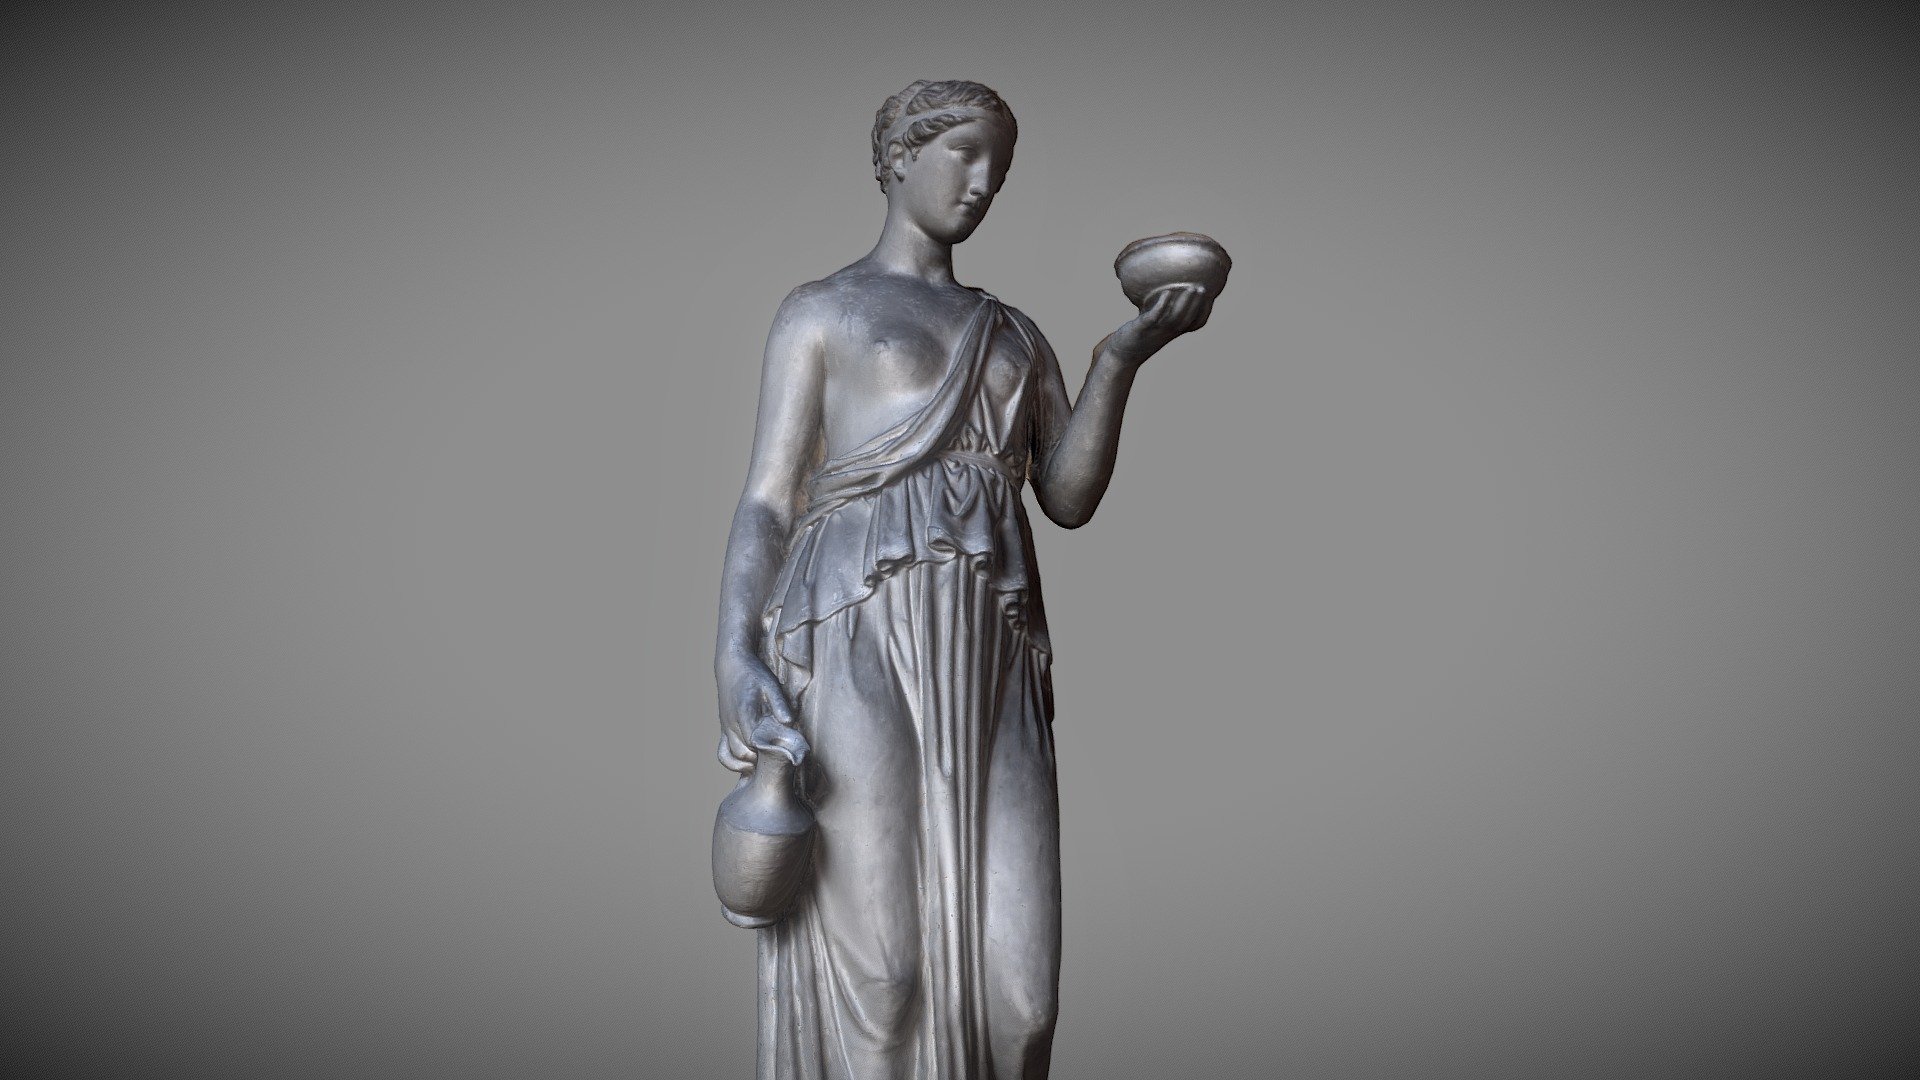 Hebe, statue in marble, after the original model from 1816 (A874), Thorvaldsen museum (Copenhagen, Denmark). Made with Memento Beta (now Remake) from Autodesk.

It is the duty of the goddess of youth, Hebe, to pour the elexir of immortality for the other gods. These are some very precious drops that she has been assigned to administer and distribute, and so Hebe is clearly concentratin on her work. She is also completely calm - the folds in her dress are almost as regular as the fluting on an acient column. However, the myth reveals that things eventually went awry: Hebe did end up spilling the elixir, and was taken off the job.

For more update, please follow @GeoffreyMarchal on Twitter 3d model